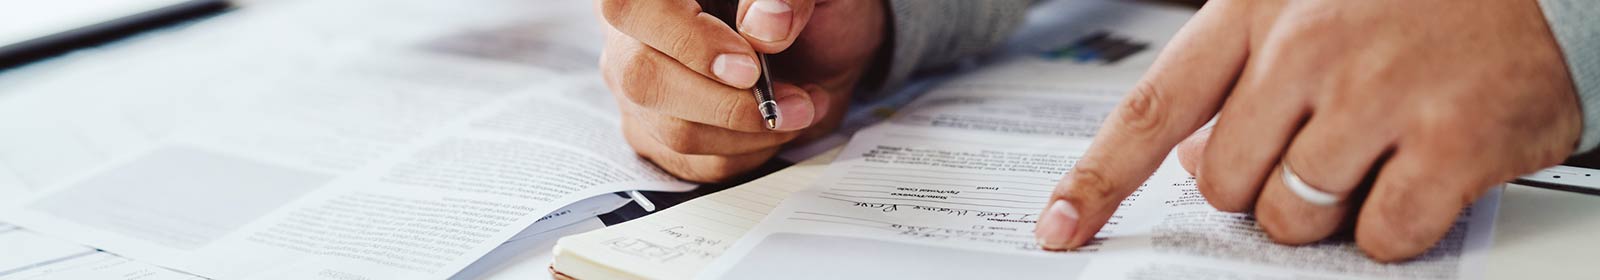 a man reviewing documents